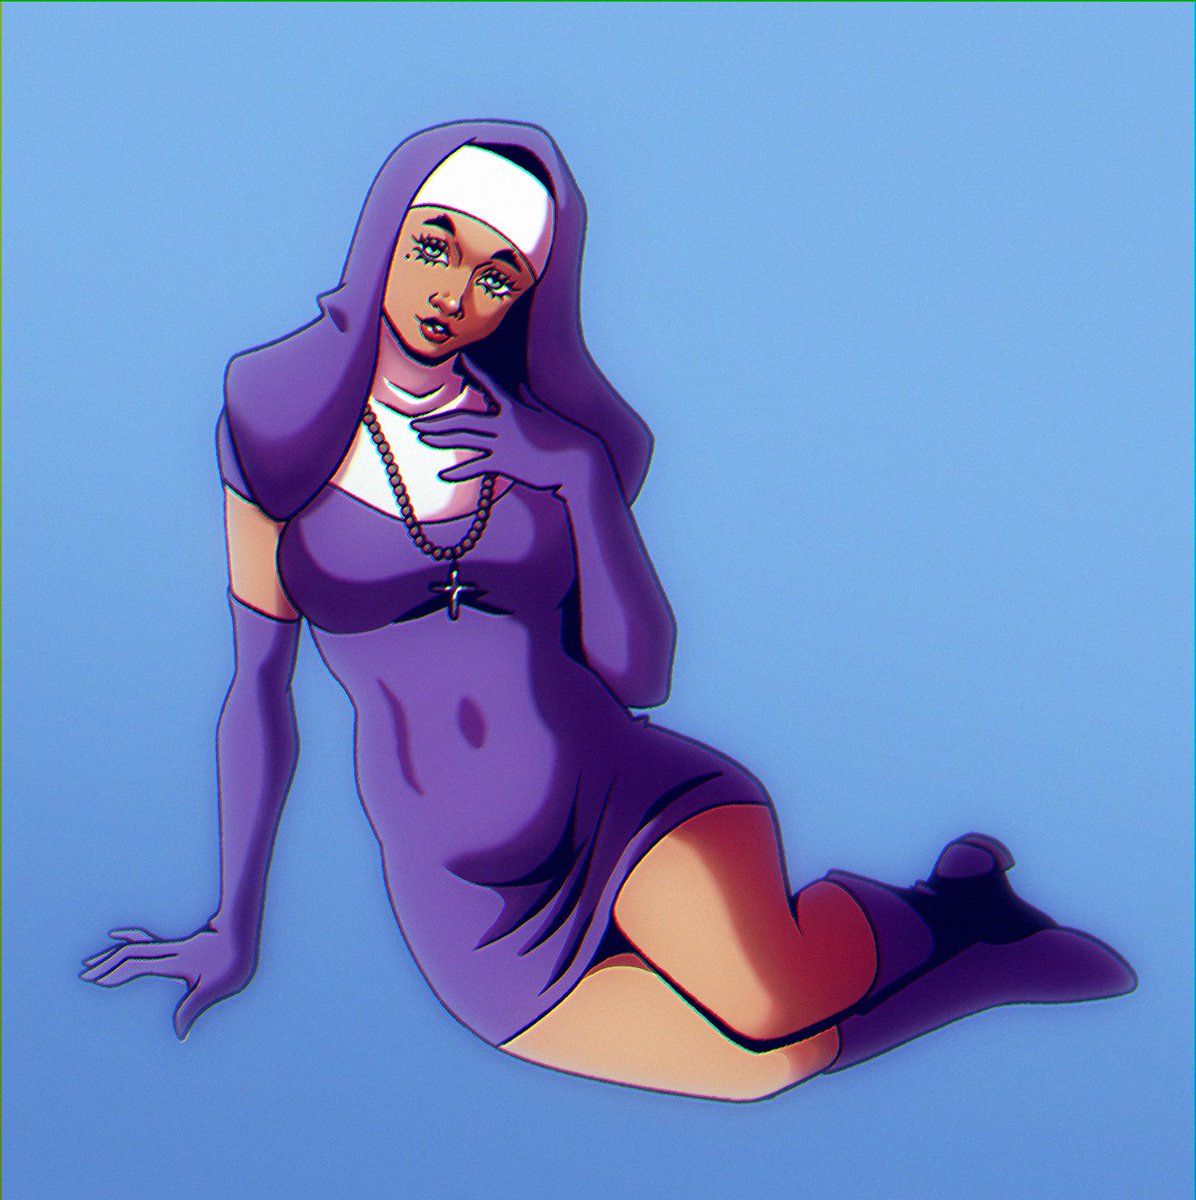 Drew a cute nun cause Twitter can't dictate others what and what not do draw. #art #nun #anime #animegirl